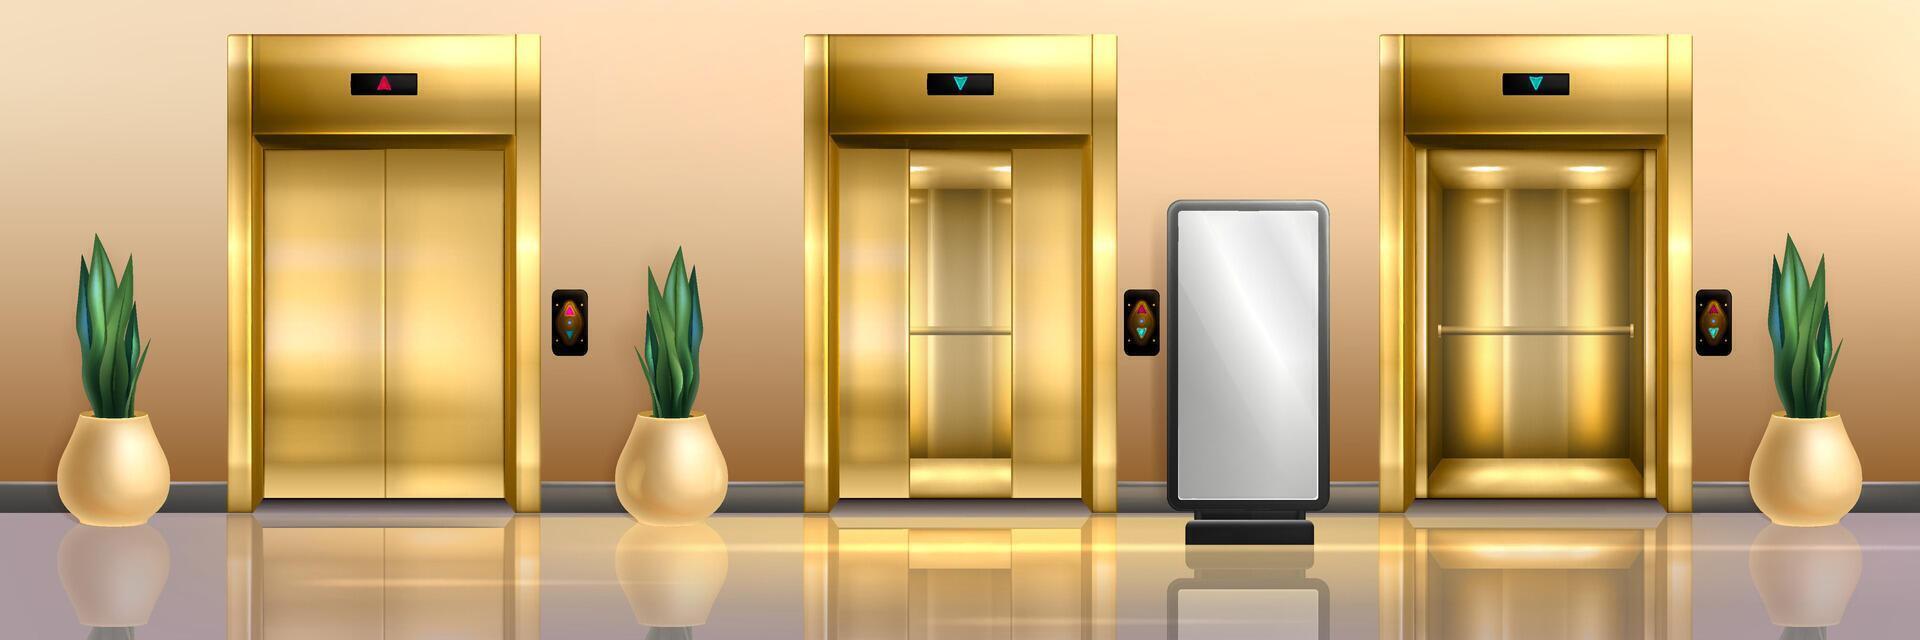 Golden elevators in waiting area with half closed, open and closed cabin doors. Office hallway, hotel lobby interior with gold lift, button panel, plants and floor led poster display for advertising. vector